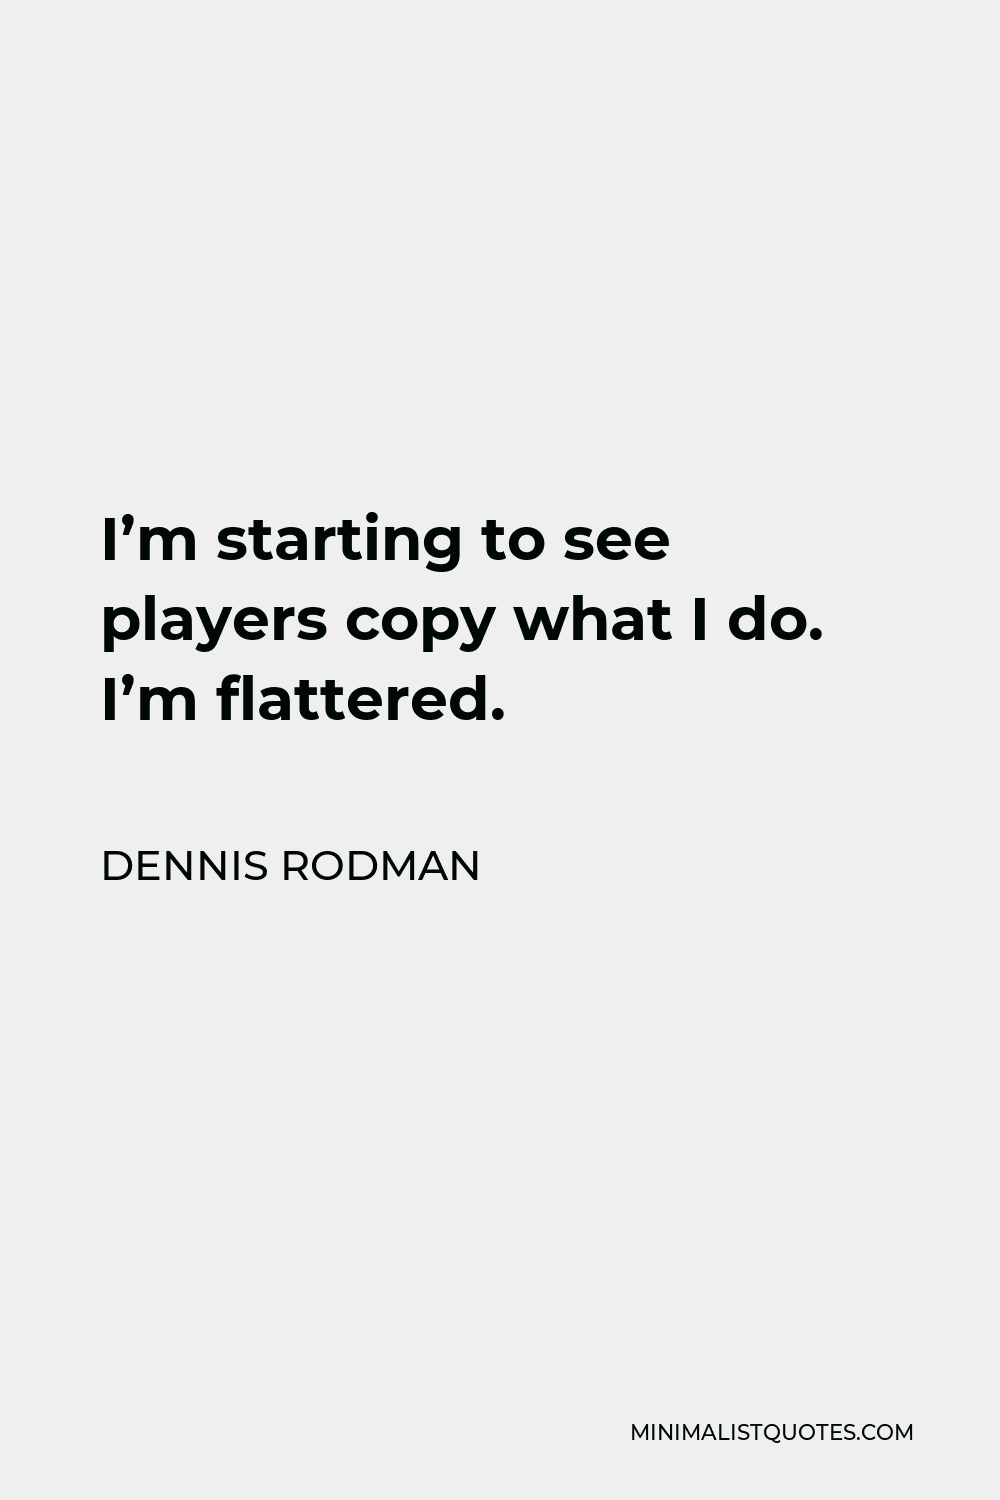 Dennis Rodman Quote - I’m starting to see players copy what I do. I’m flattered.